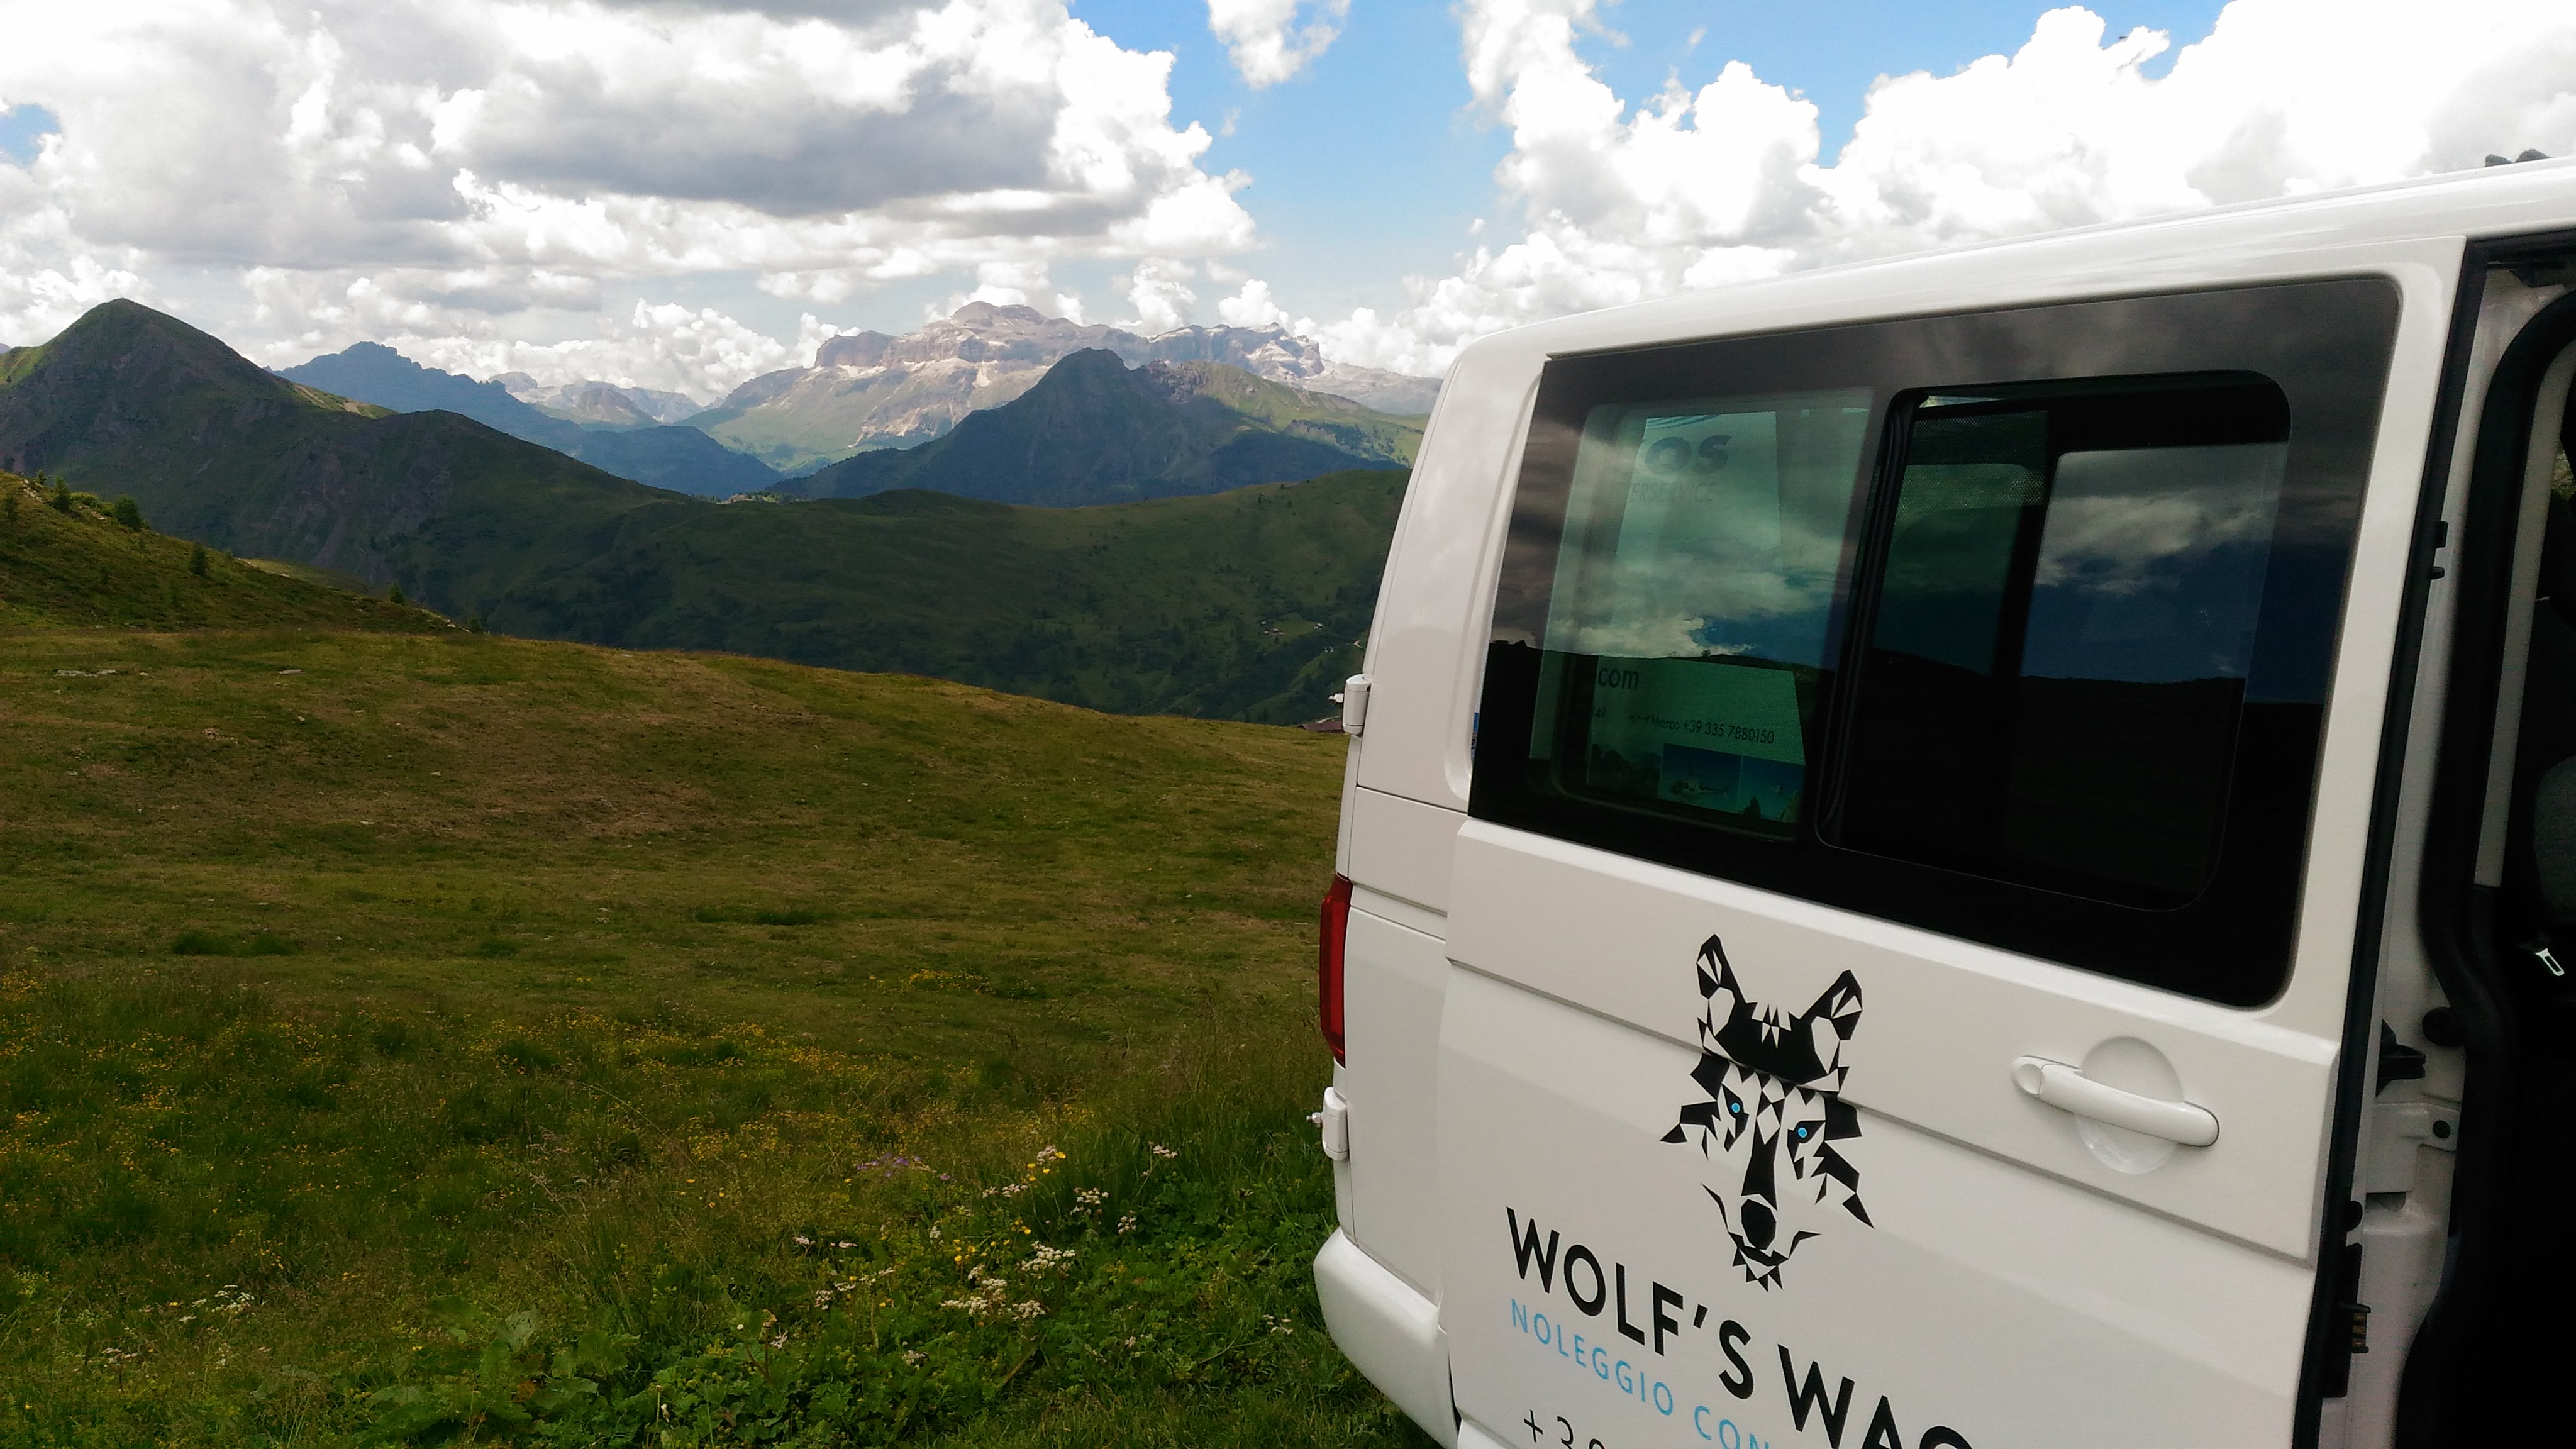 Wolf's Wagen Taxi Canazei Taxi val di fassa